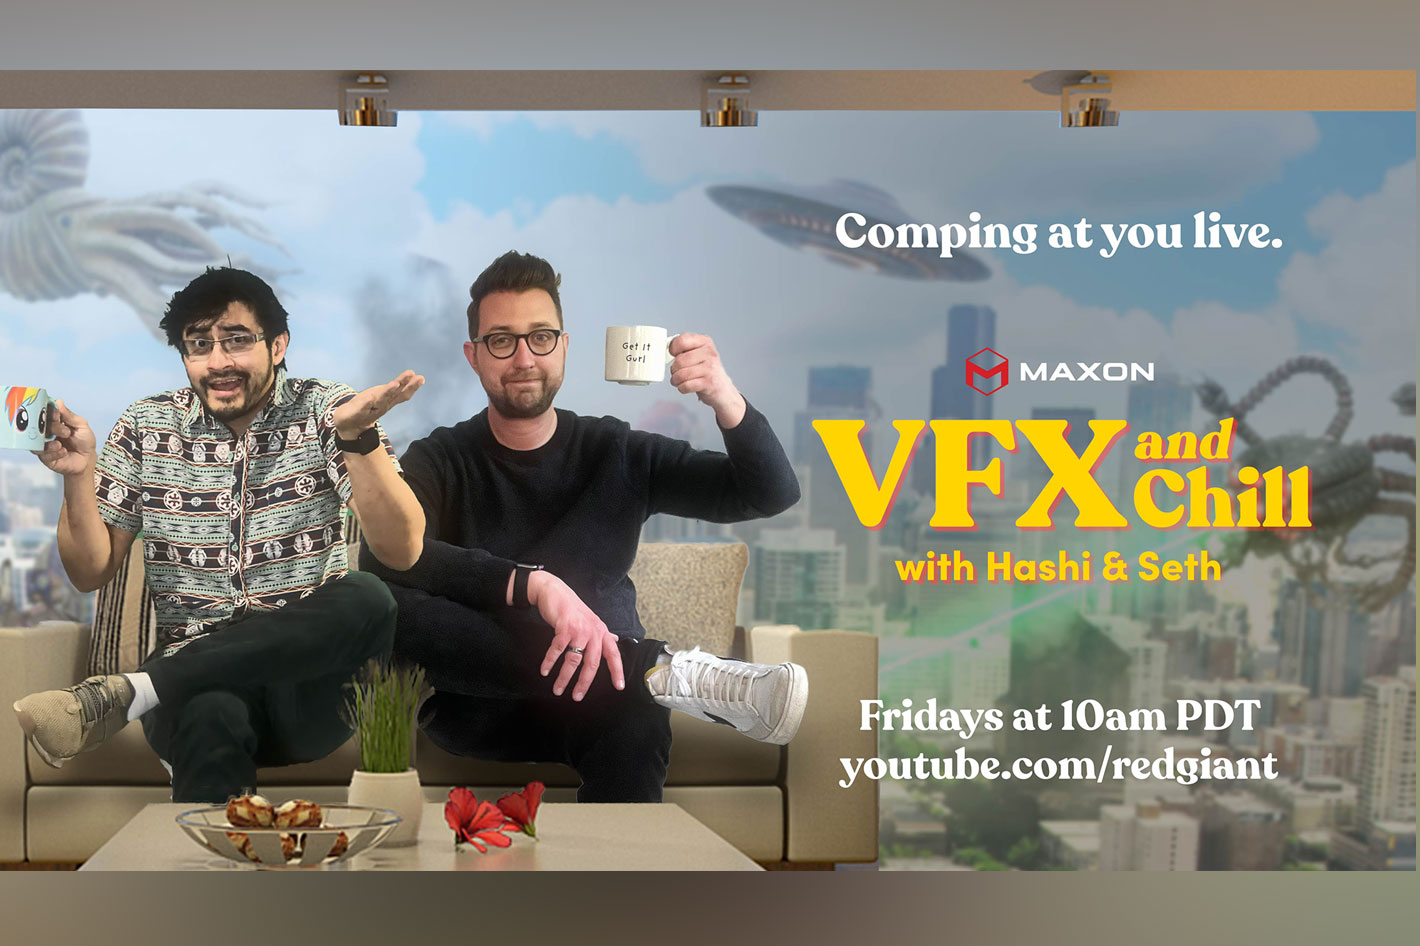 VFX and Chill: Maxon’s new live talk show starts this May